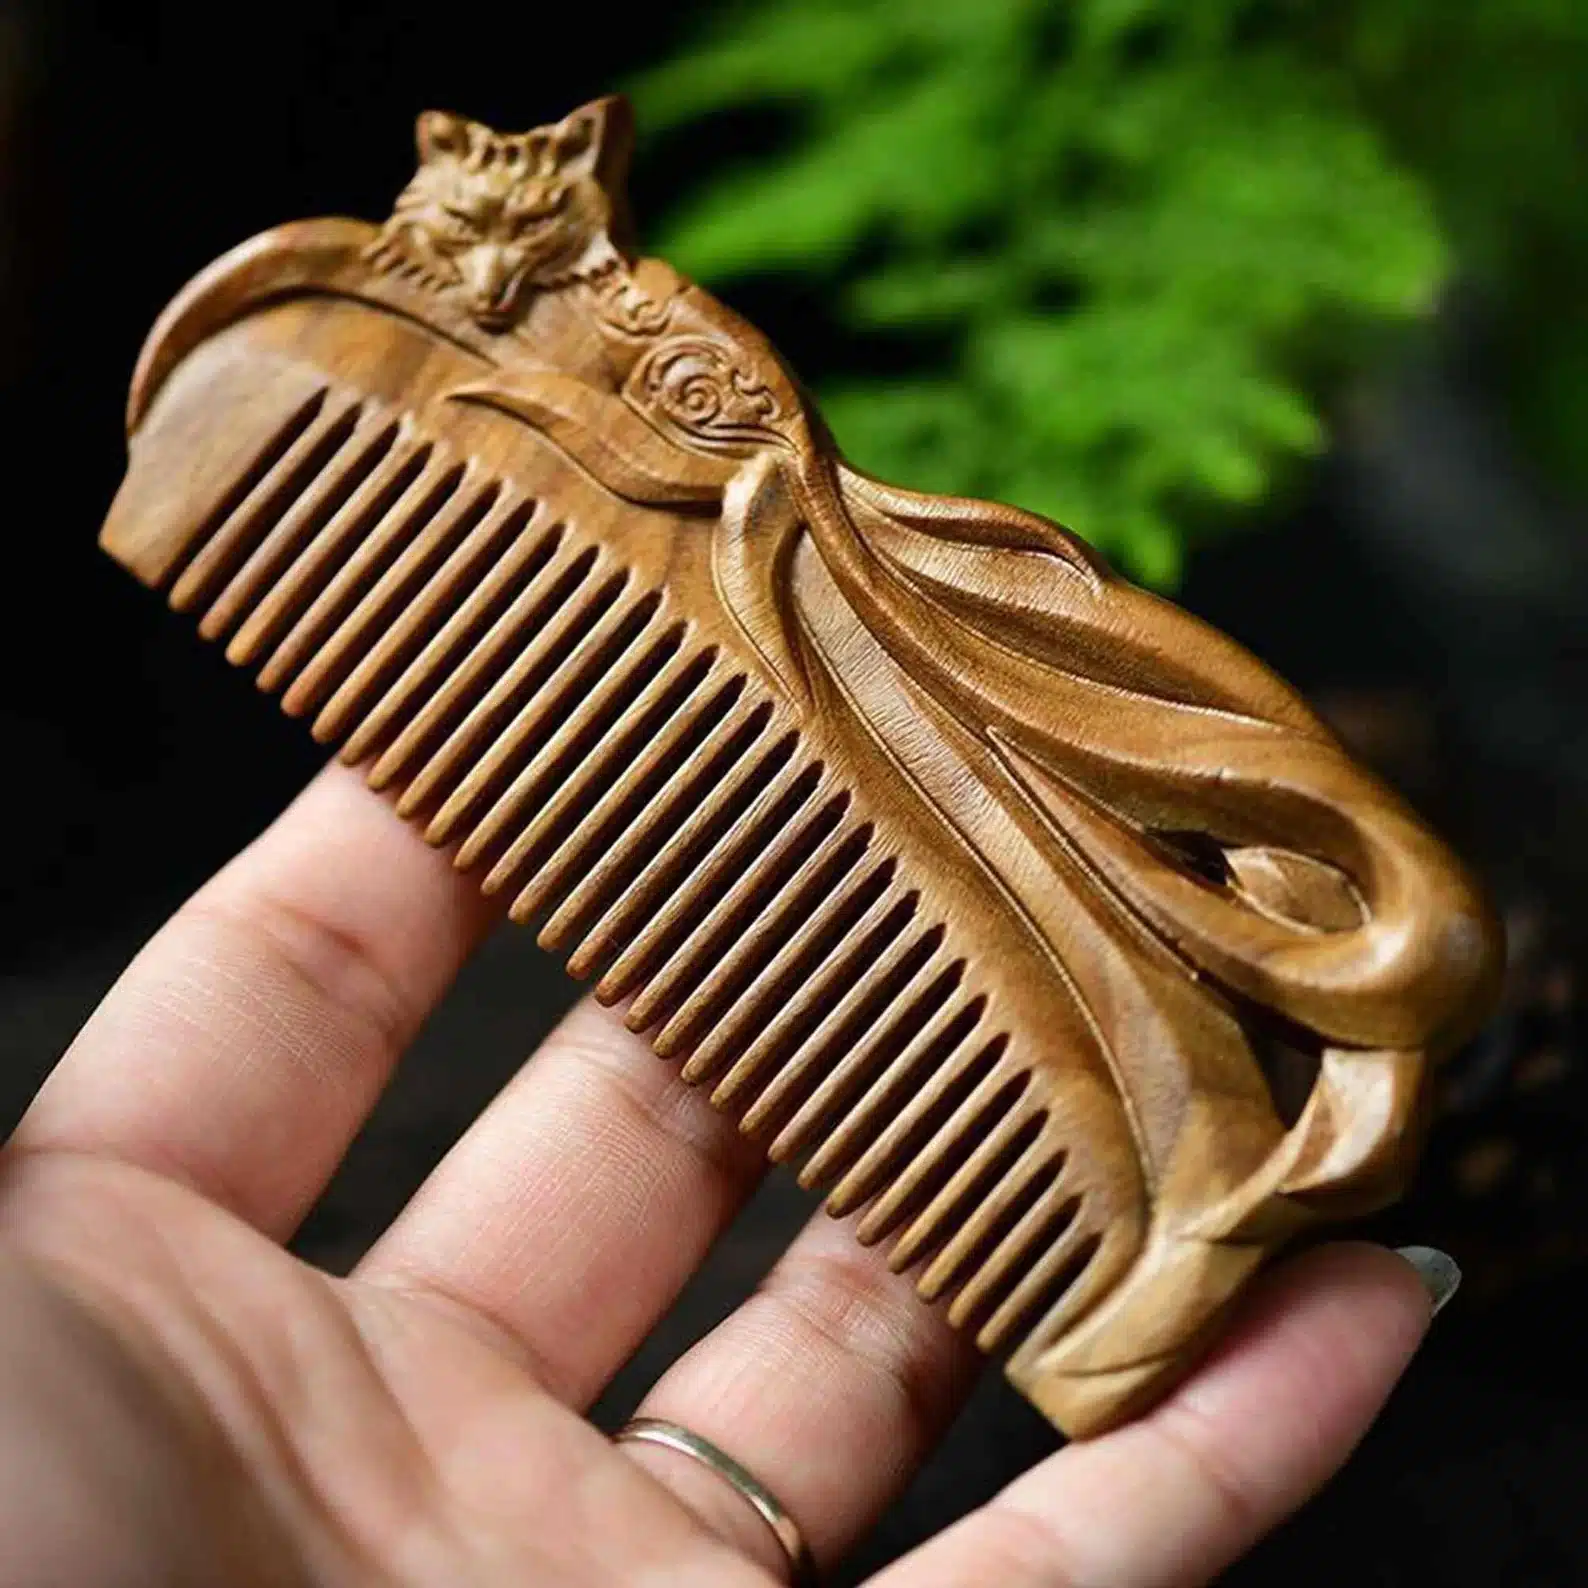 Wooden Hair Comb